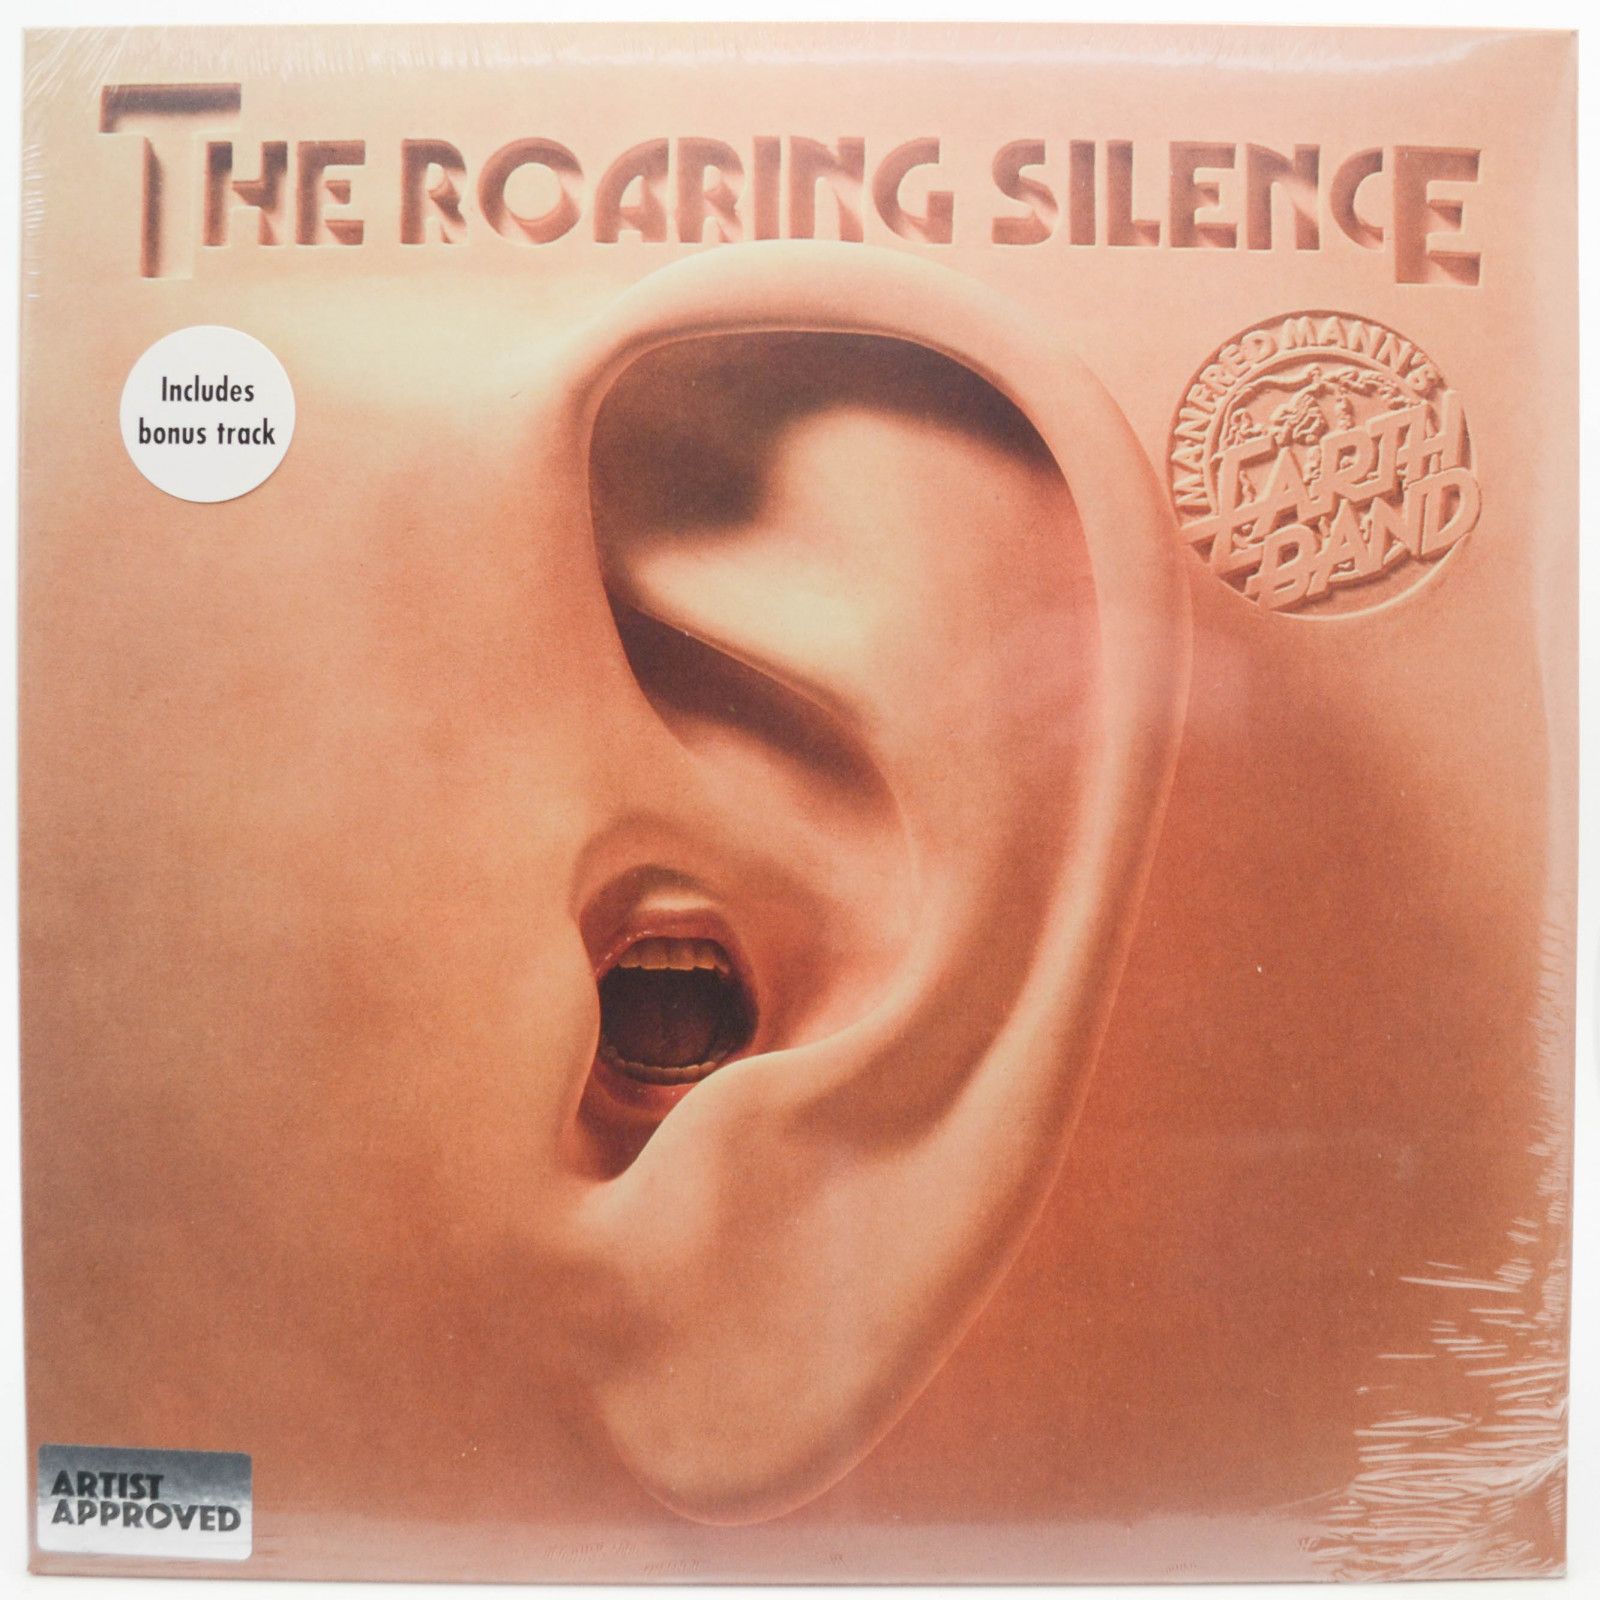 Manfred Mann's Earth Band — The Roaring Silence (UK), 1976